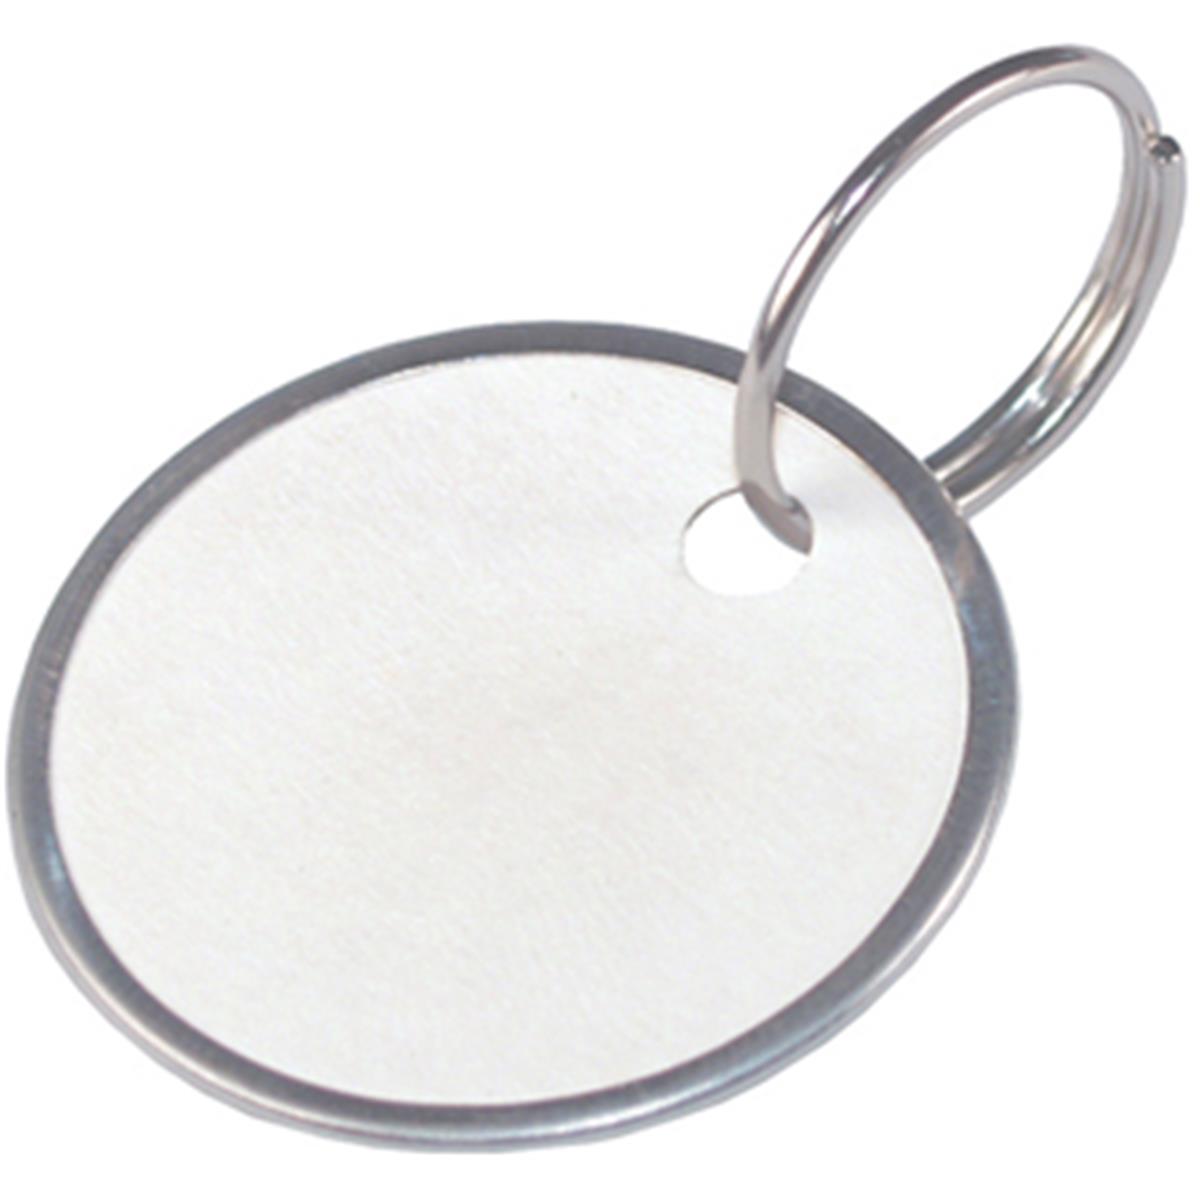 701331 1.5 In. Paper Key Tag With Wire Ring